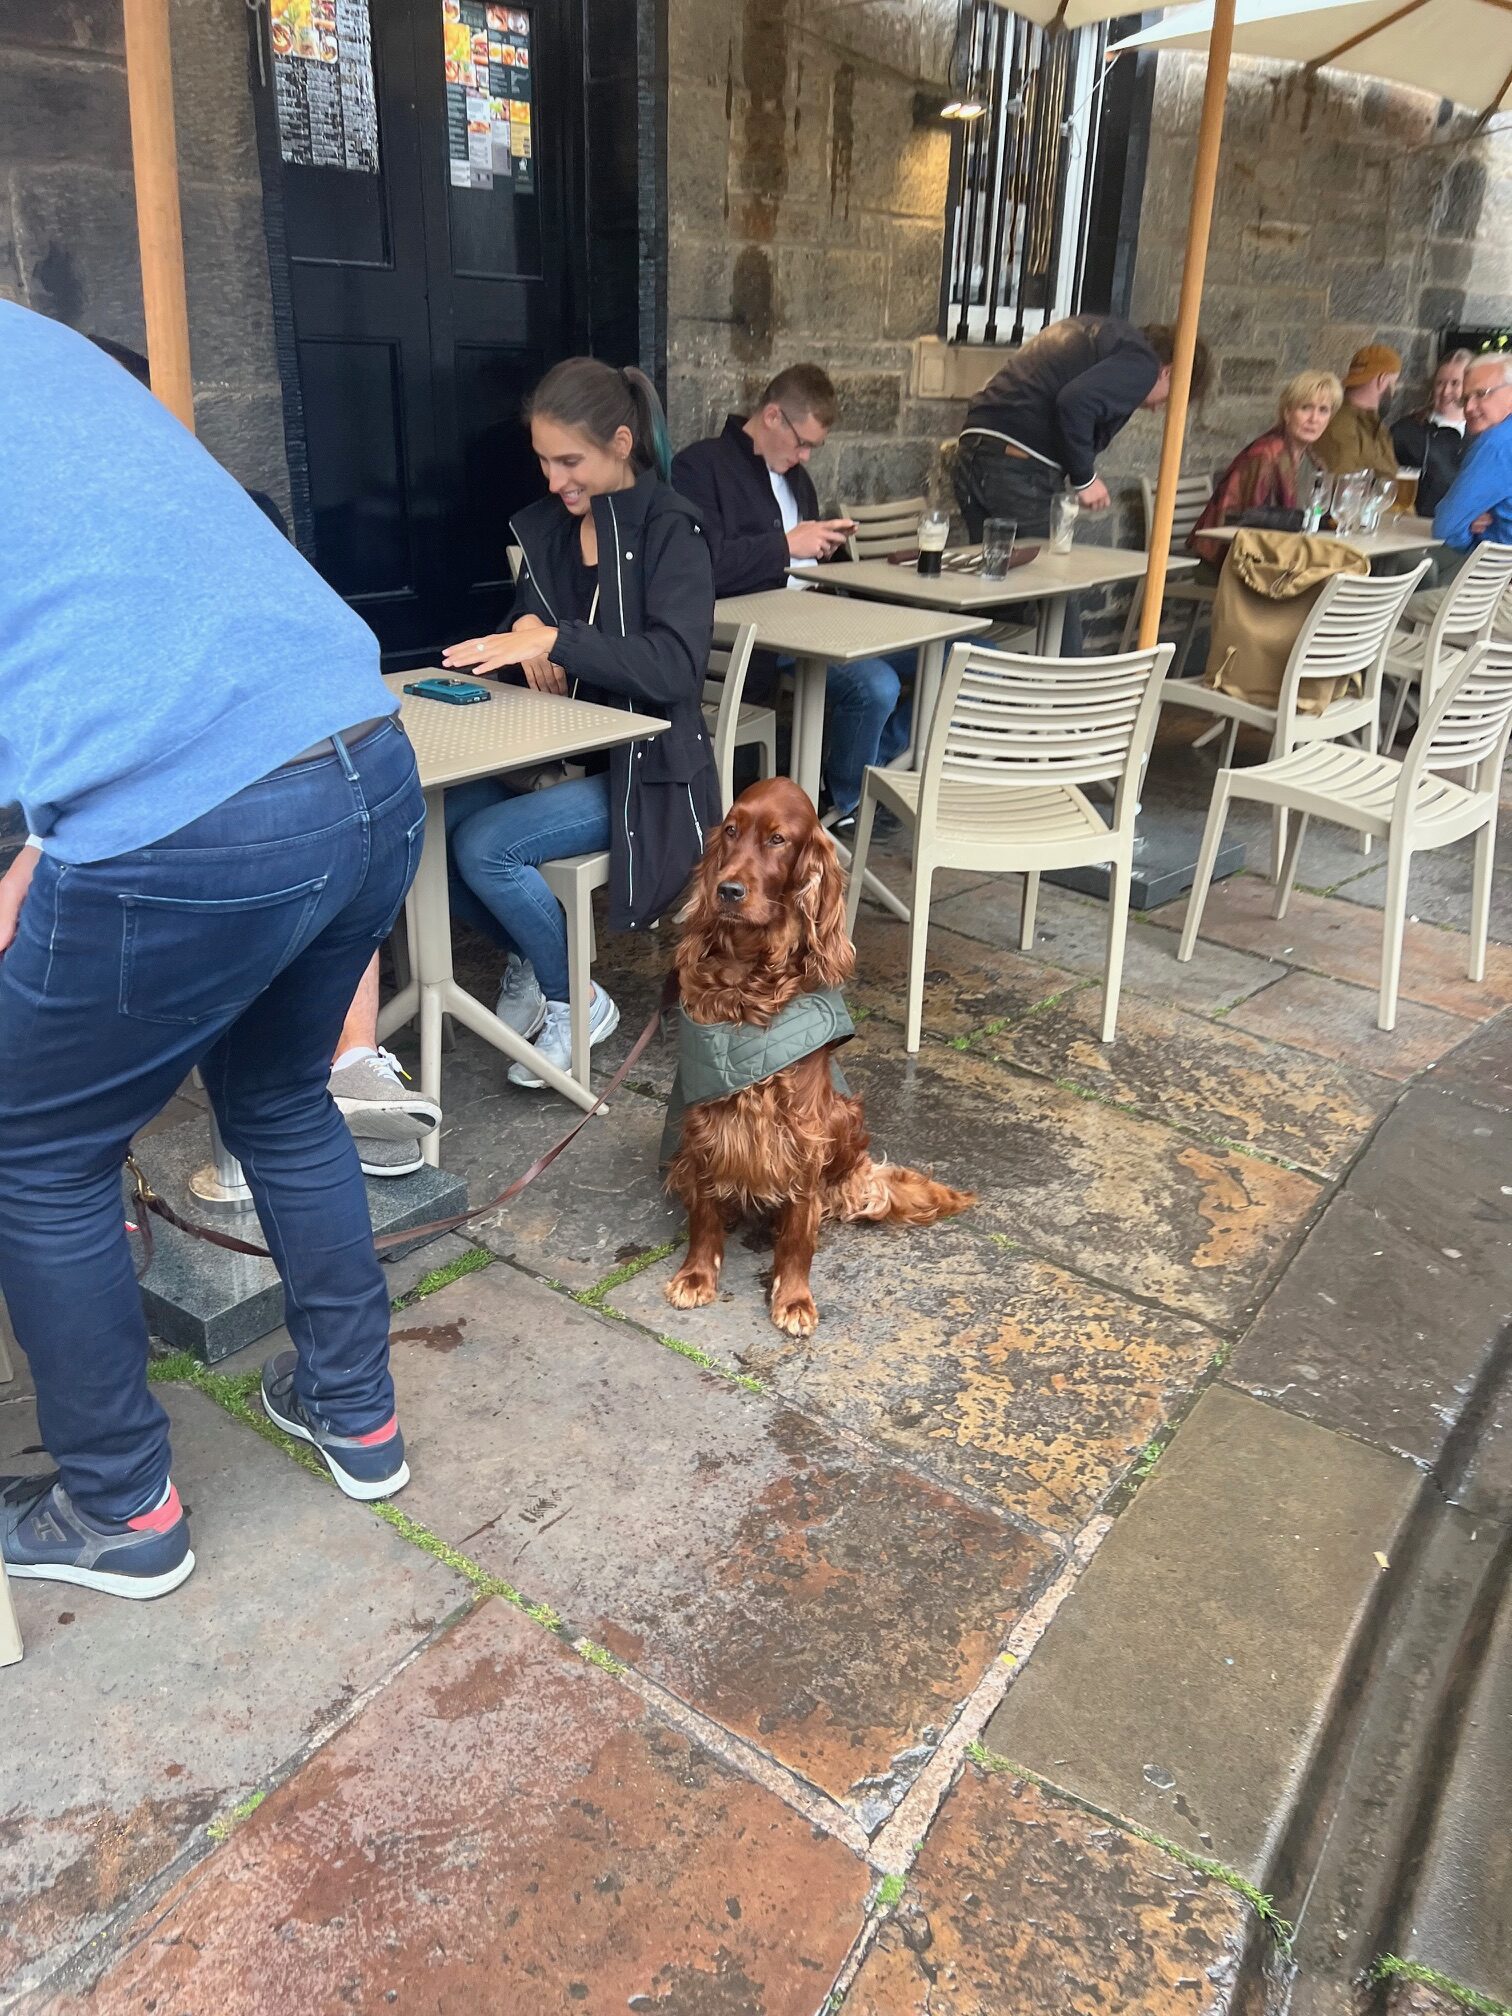 An outdoor cafe wth a majestic looking dog 